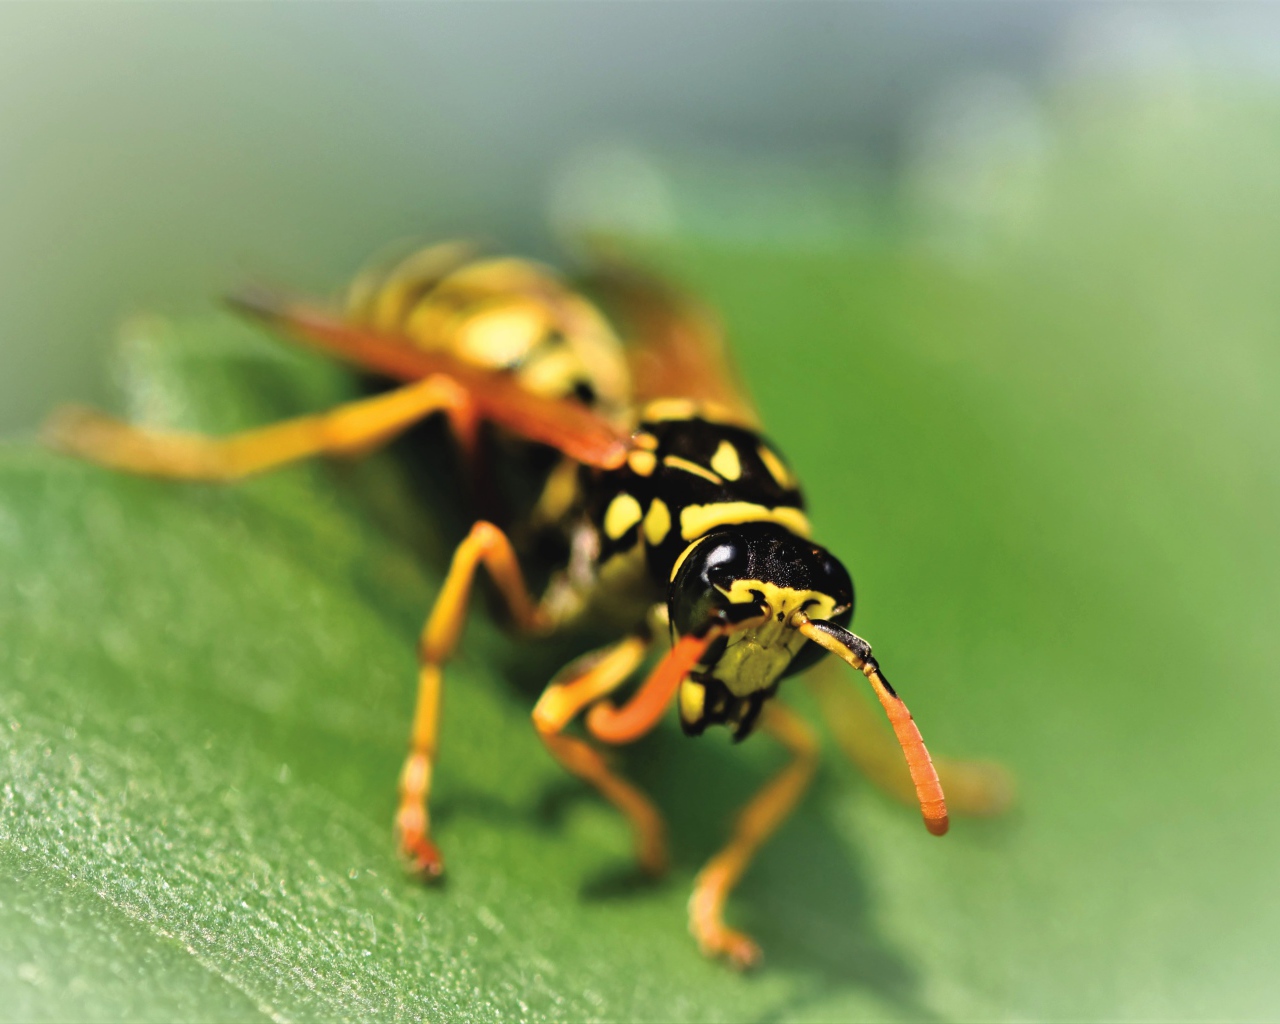 Wasp sits on a green leaf close-up